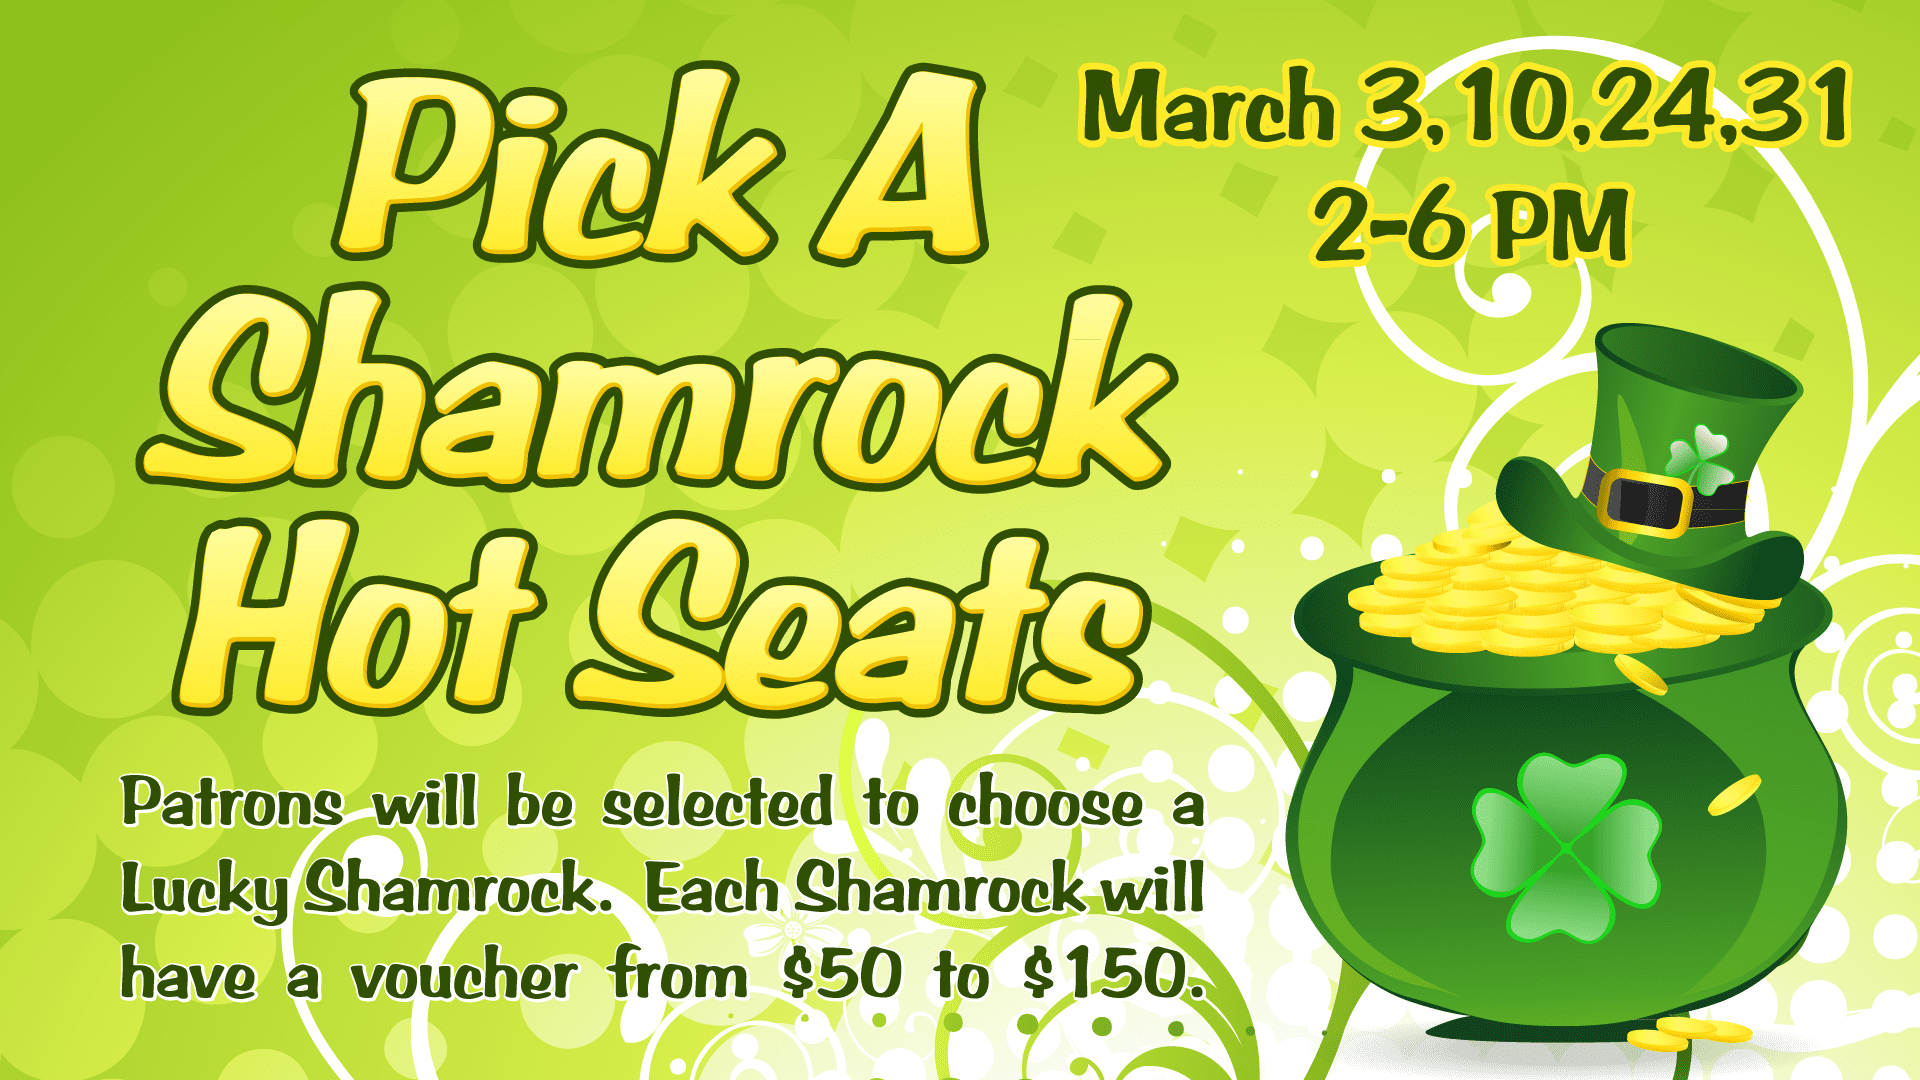 St. patrick's day themed promotional event with times and potential prize amounts.